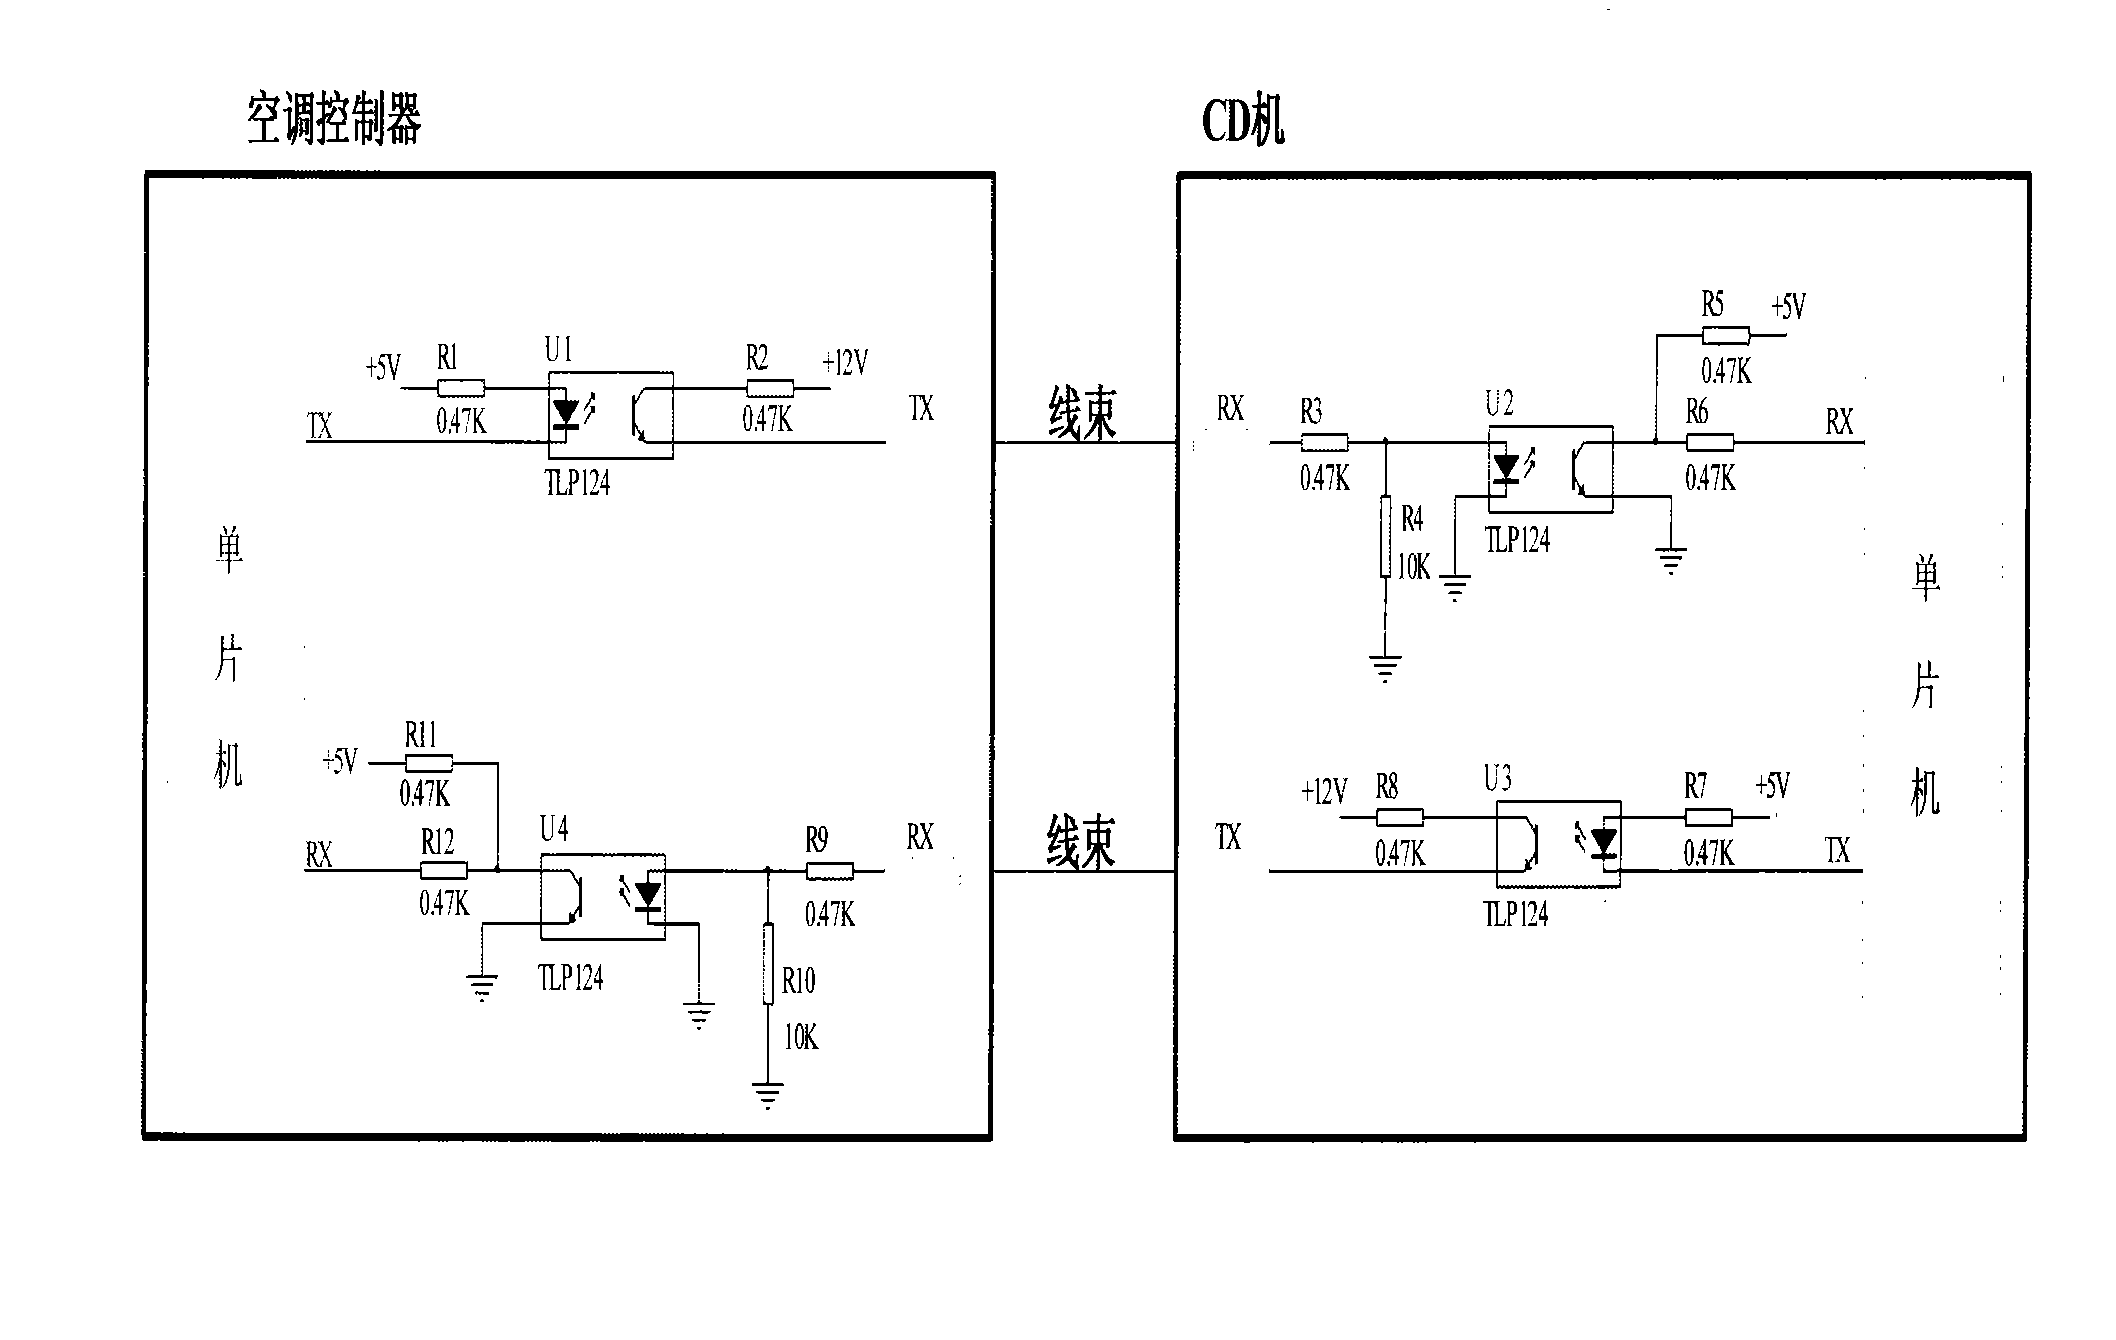 Communication system for automobile air-conditioning controller and external equipment